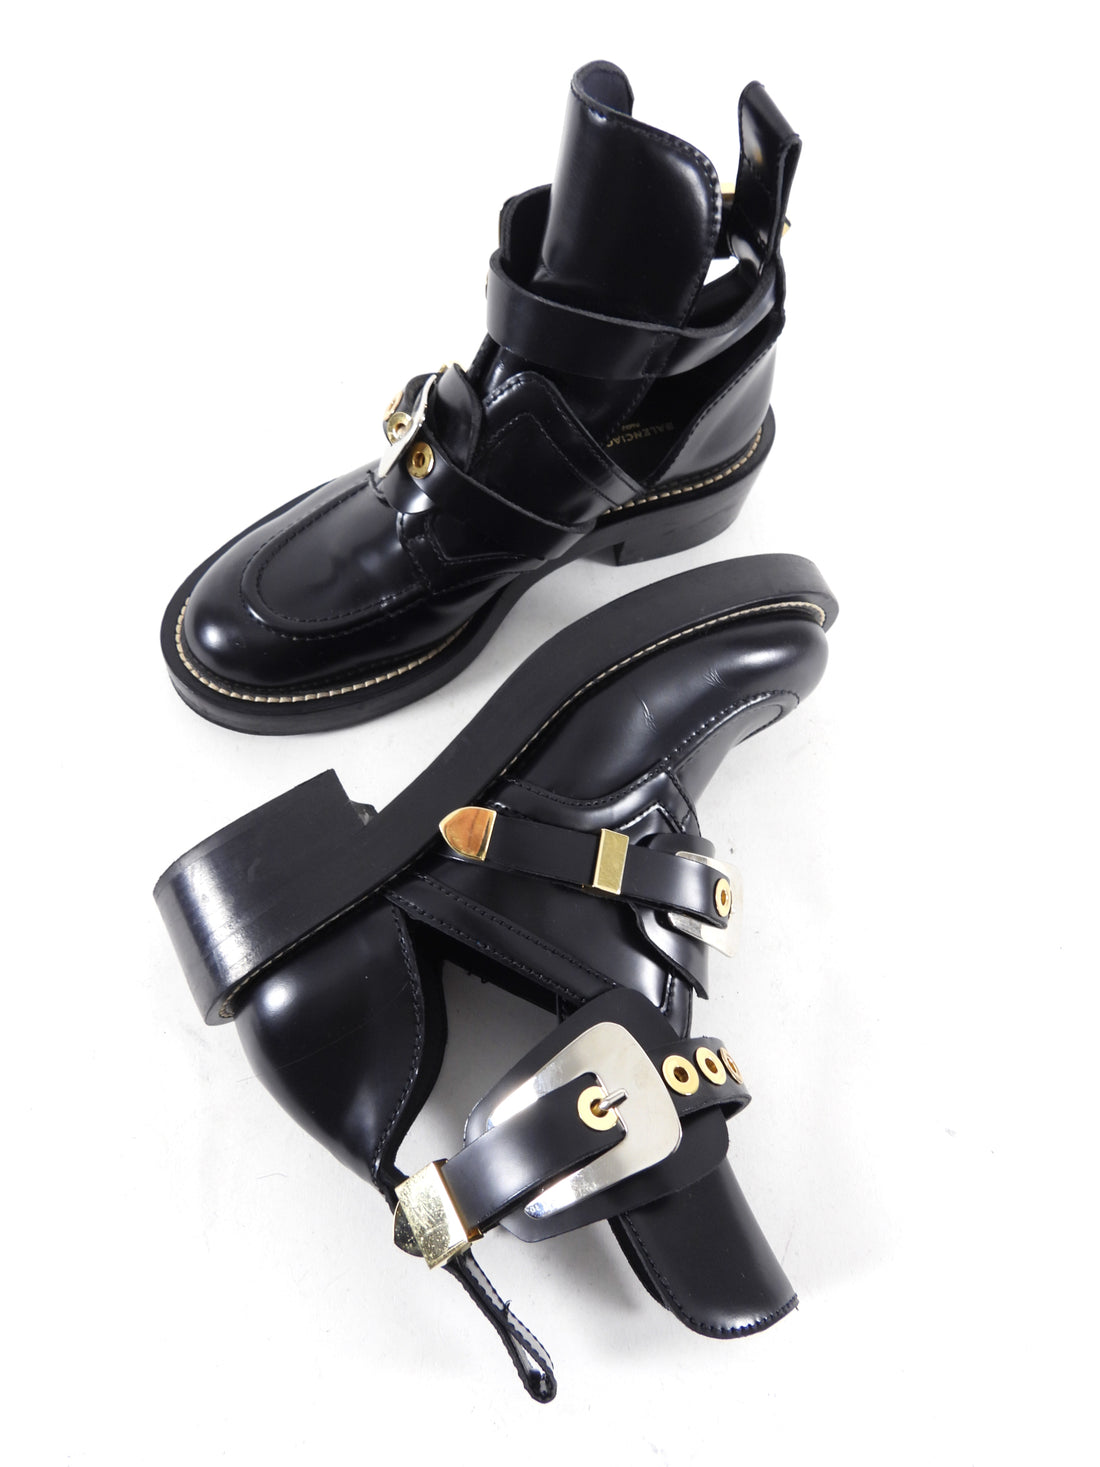 Balenciaga Black Buckle Ankle Boots.  Black gloss leather upper with mixed metal goldtone and silvertone hardware.  Rounded toe, buckle strap detail, cut-out design.  Marked size 37 but French sizing runs small so best for a 36.5.  Excellent pre-owned condition.  Without duster or box.